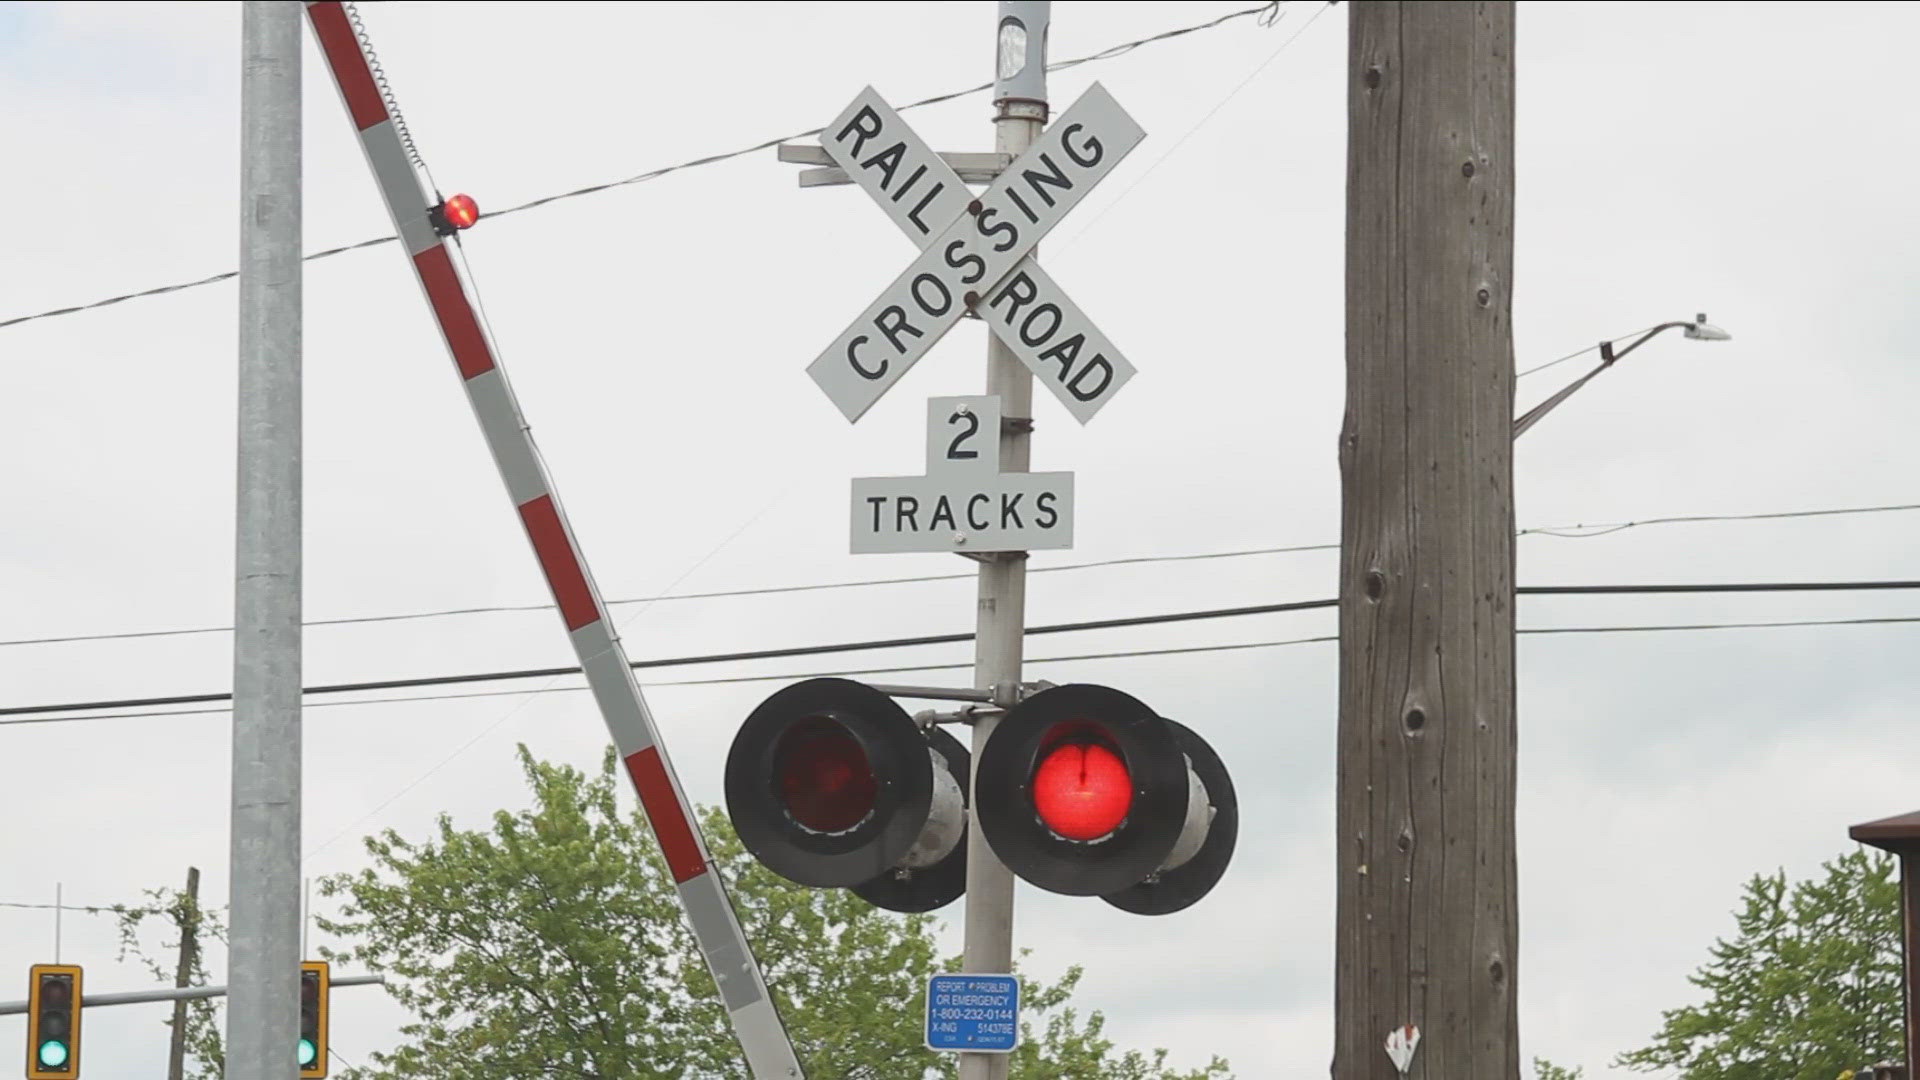 Three people were killed in a crash that involved a pickup truck and a passenger train Friday night in North Tonawanda.